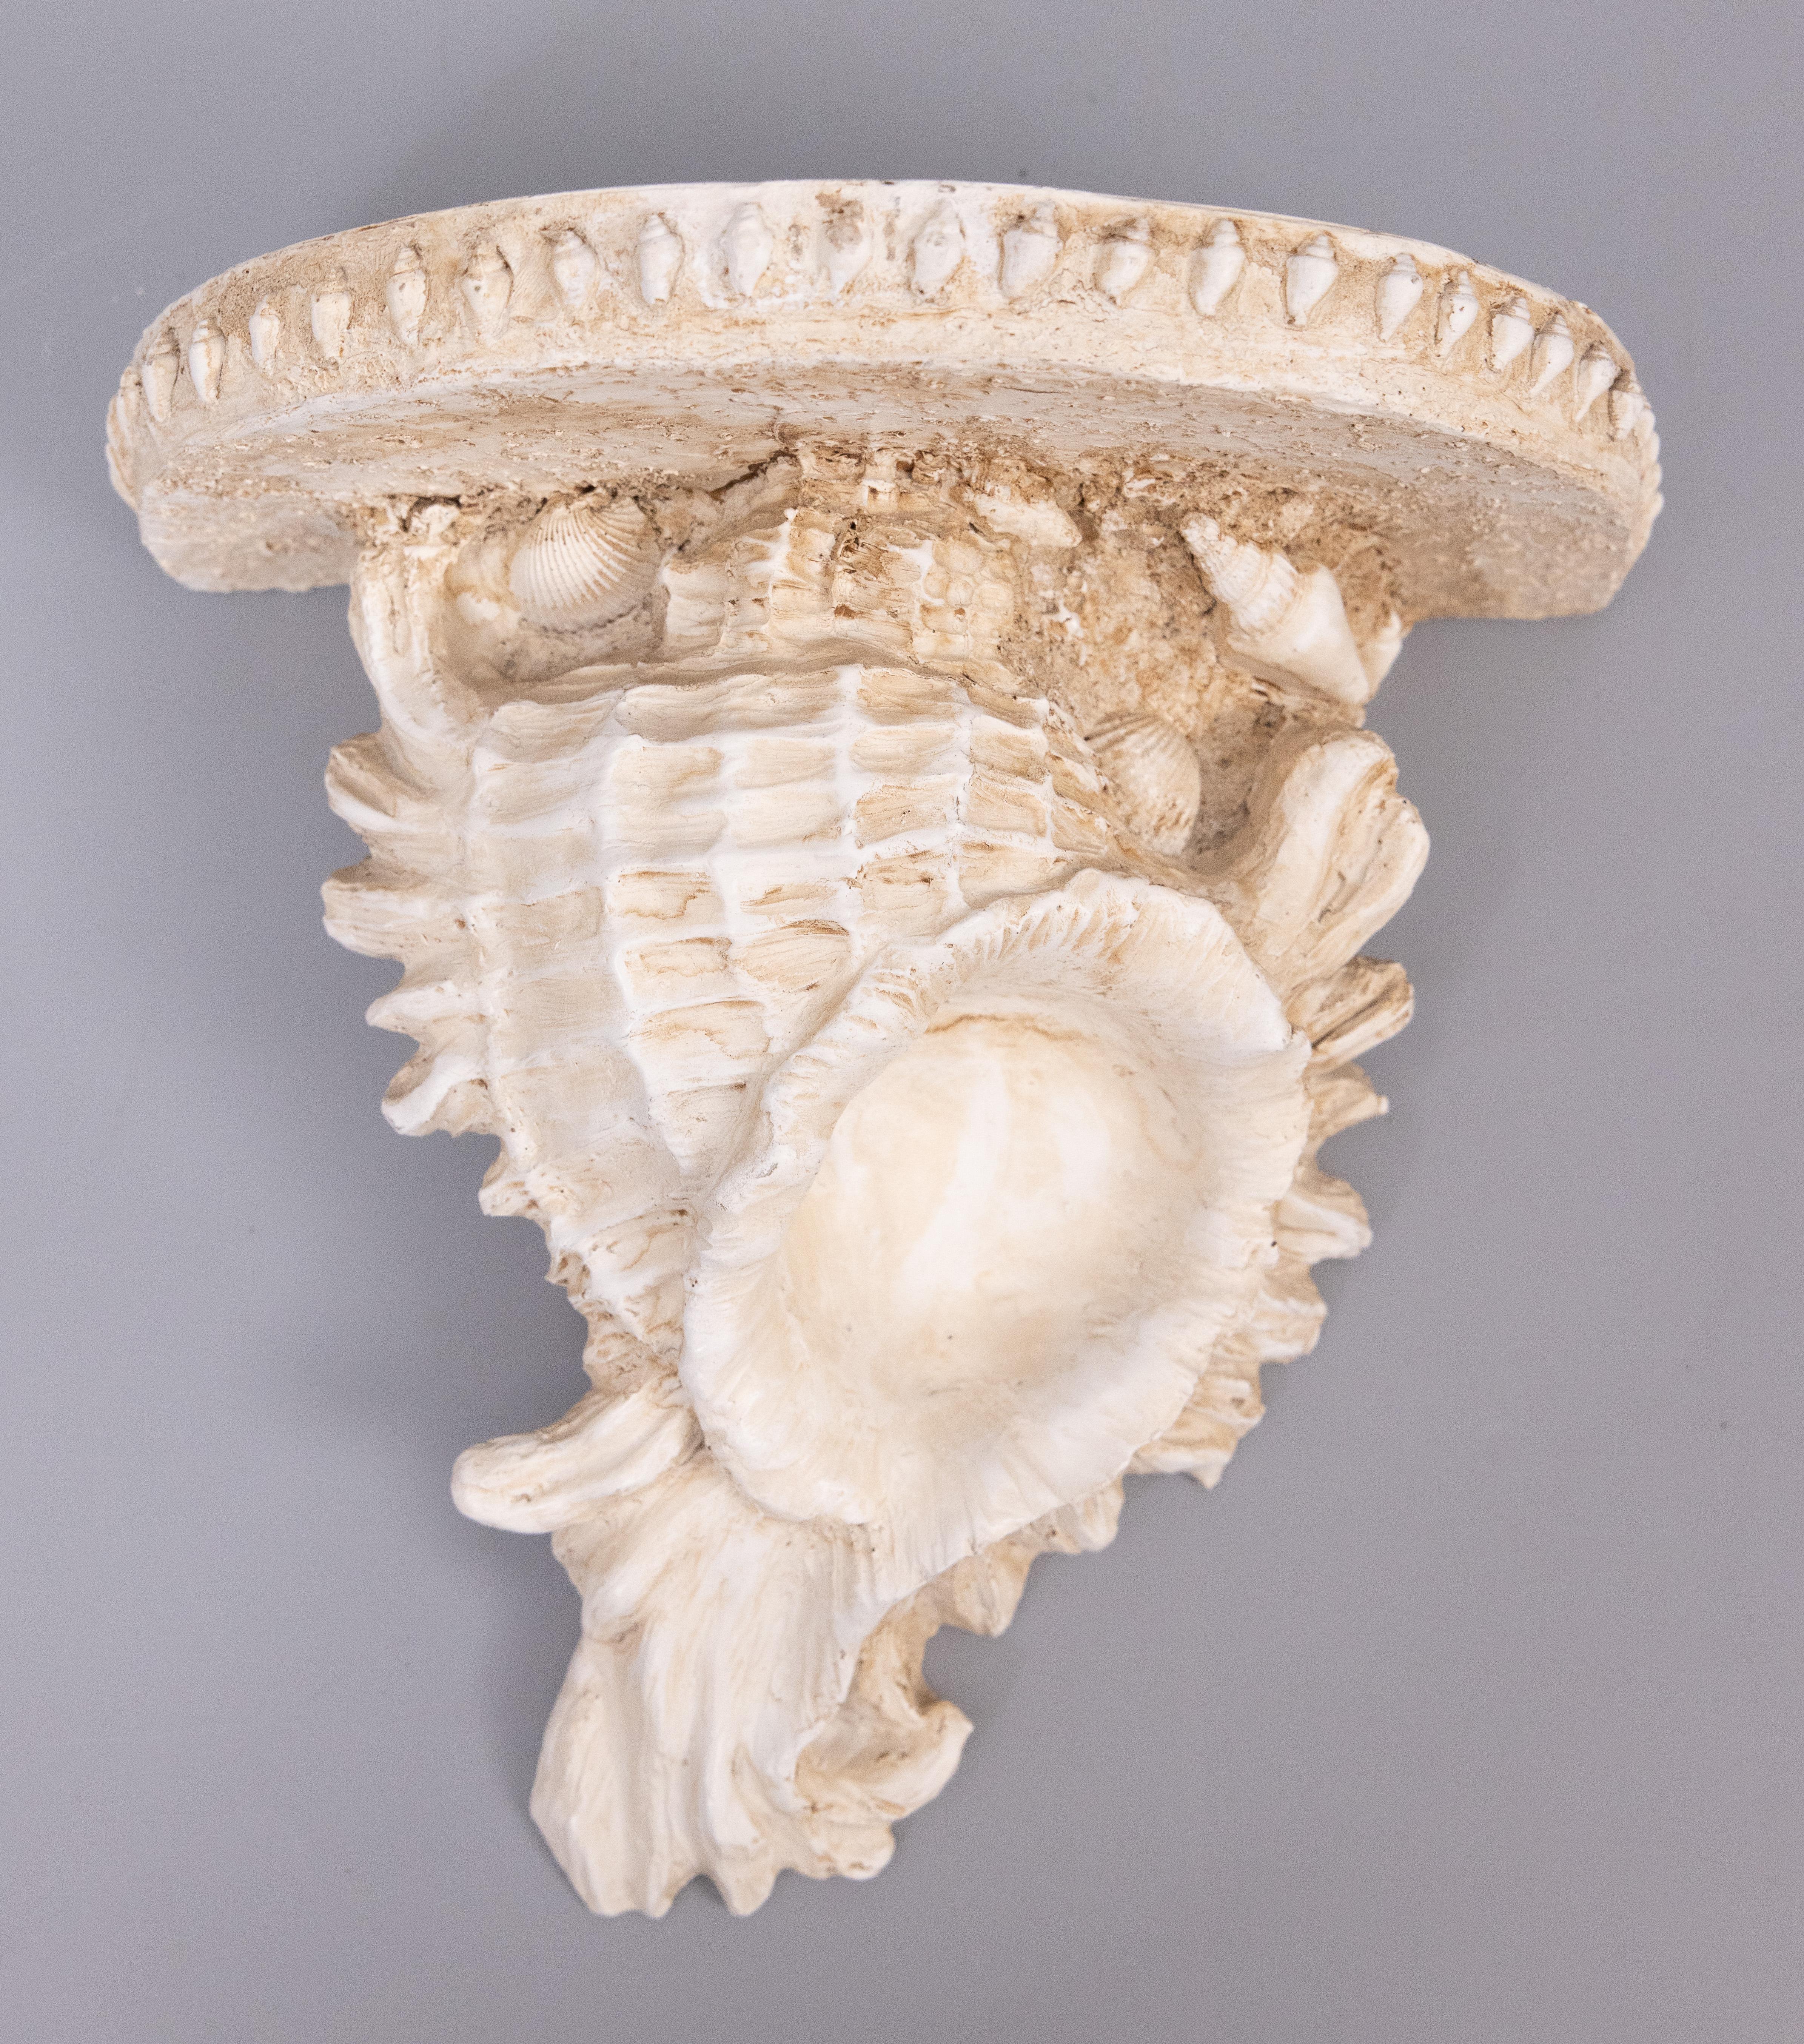 A lovely pair of vintage faux shell shaped wall brackets or shelves with a Nautical seashell encrusted design. They are perfect for displaying decorative collectibles or fabulous on their own.

DIMENSIONS
9.75